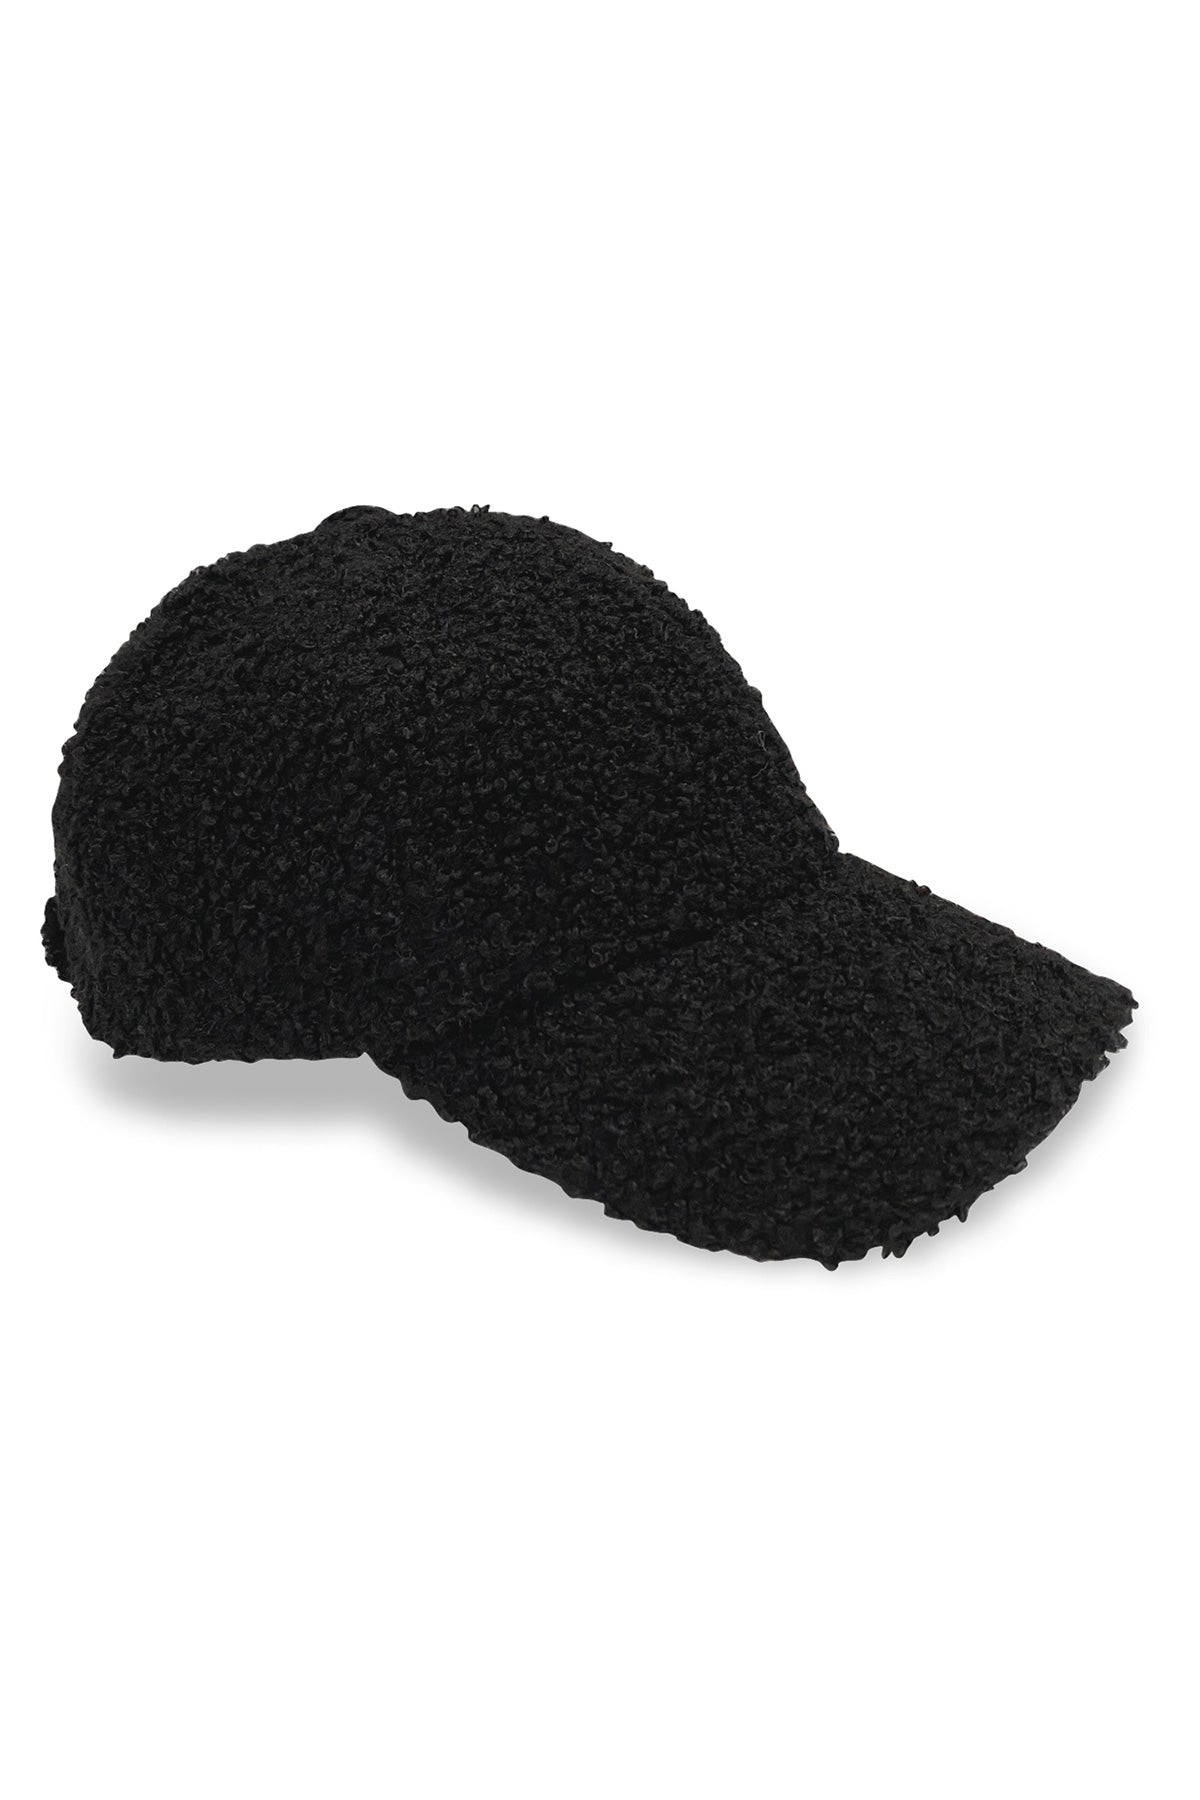 A black SHERPA CAP by Velvet by Graham & Spencer featuring a eco faux-sherpa lining, perfect for cold-weather occasions, on a white background.-35445771960513